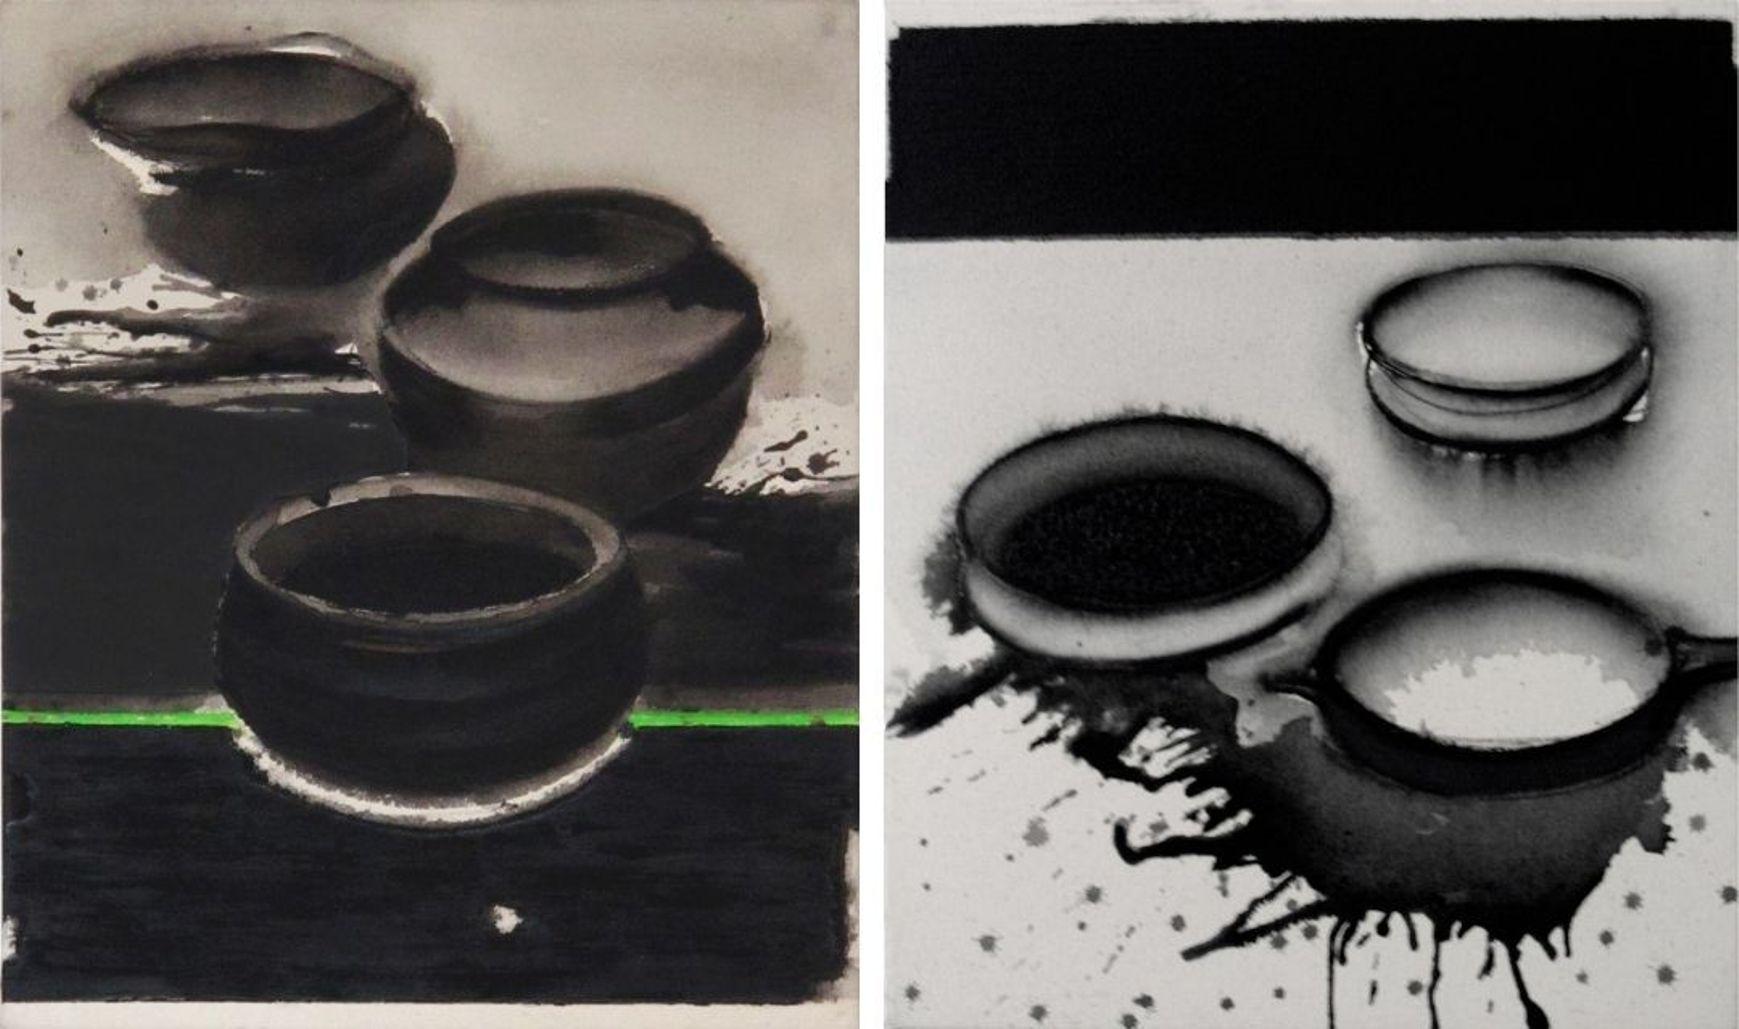 Pots, Acrylic & Pigment on Canvas, (Set of 2) Black, Green, Grey "In Stock"